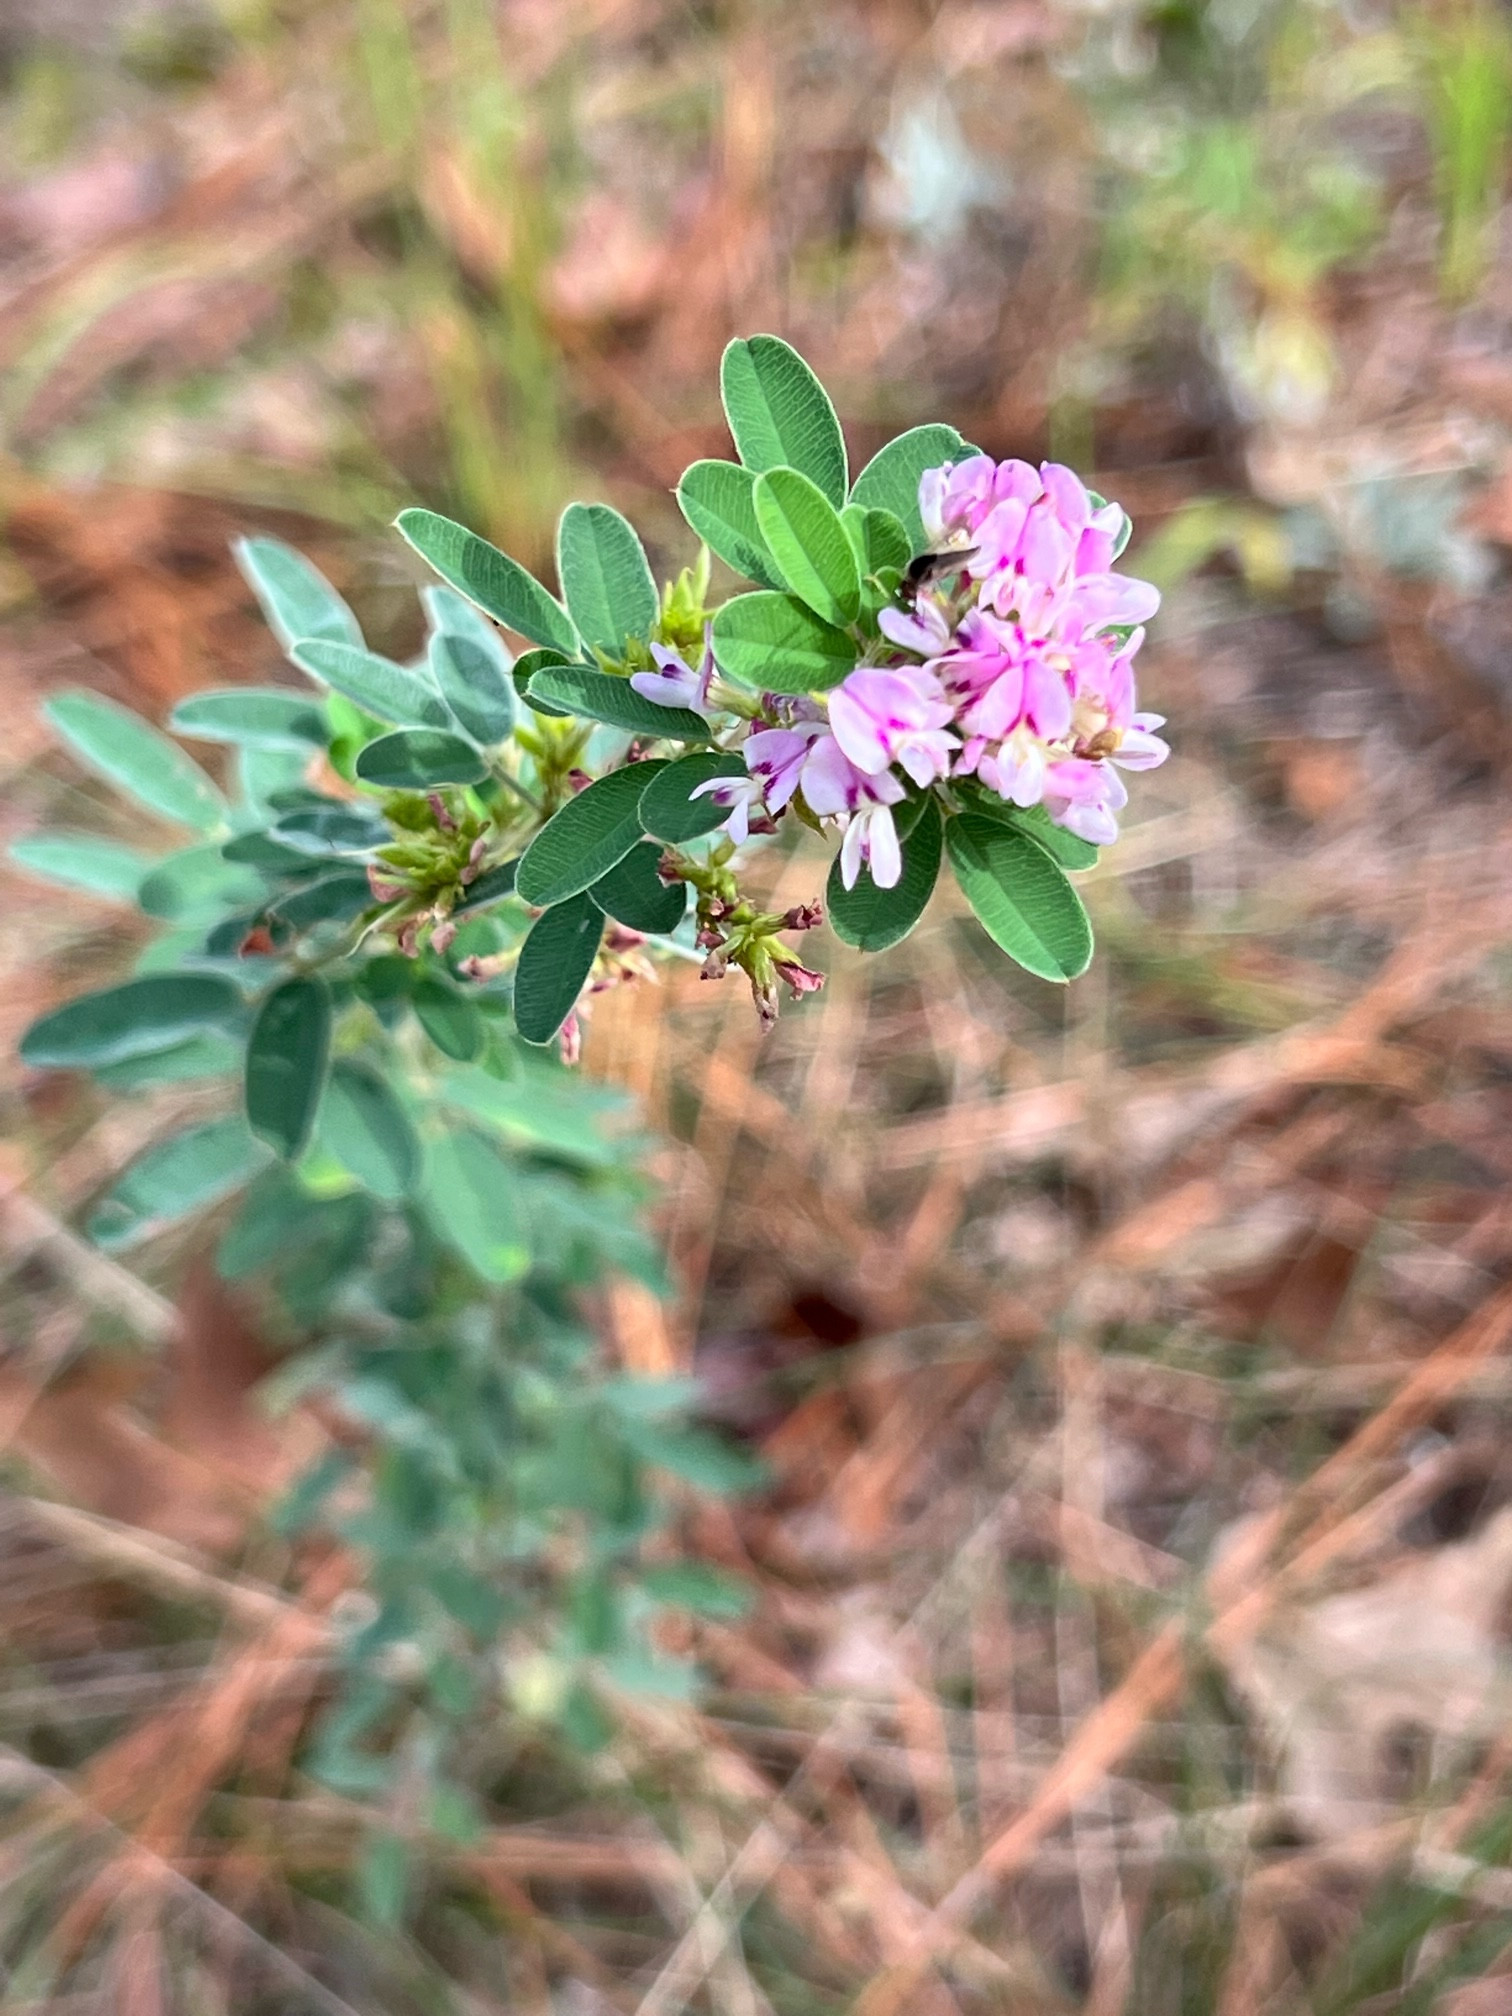 The Scientific Name is Lespedeza virginica. You will likely hear them called Slender Lespedeza, Virginia Lespedeza, Slender Bush-clover. This picture shows the  Narrow clusters of small purple flowers.  of Lespedeza virginica